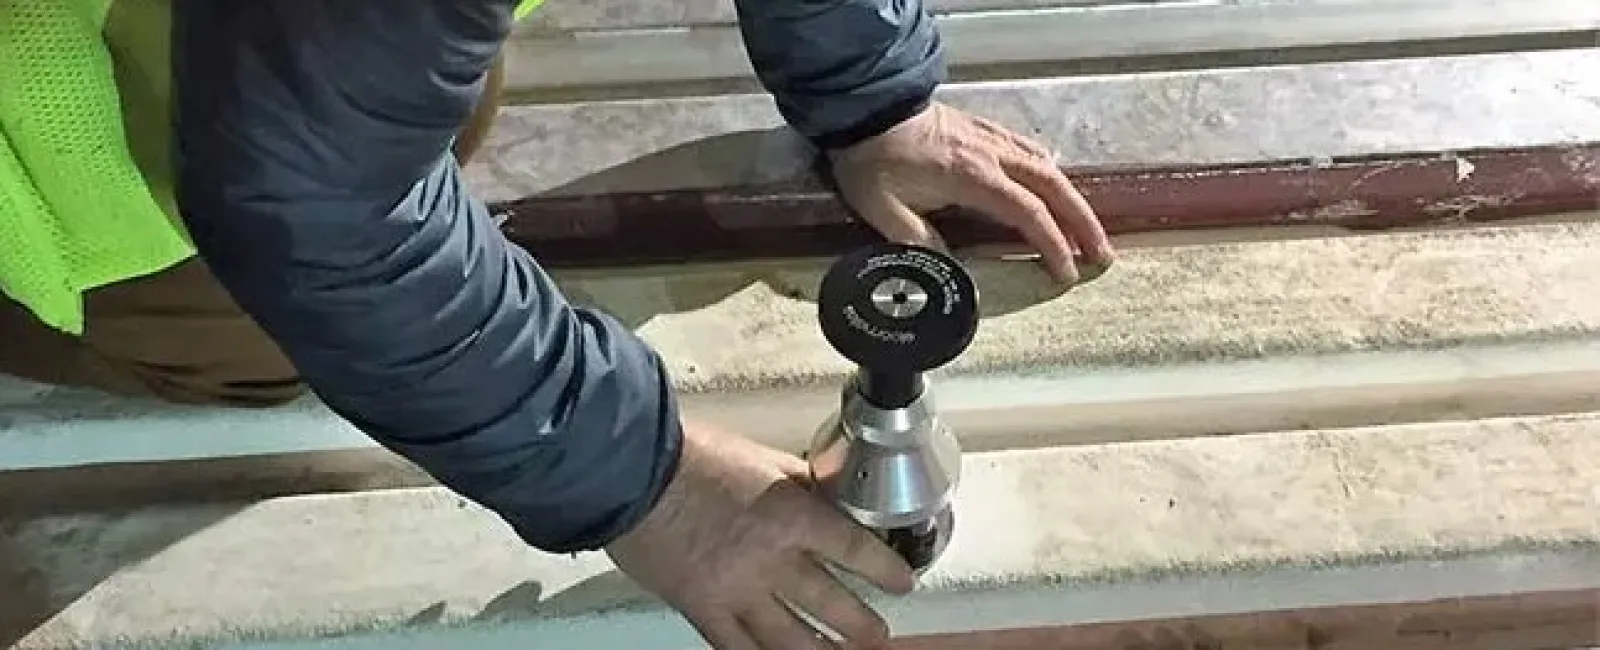 connecticut roofer installing a roof